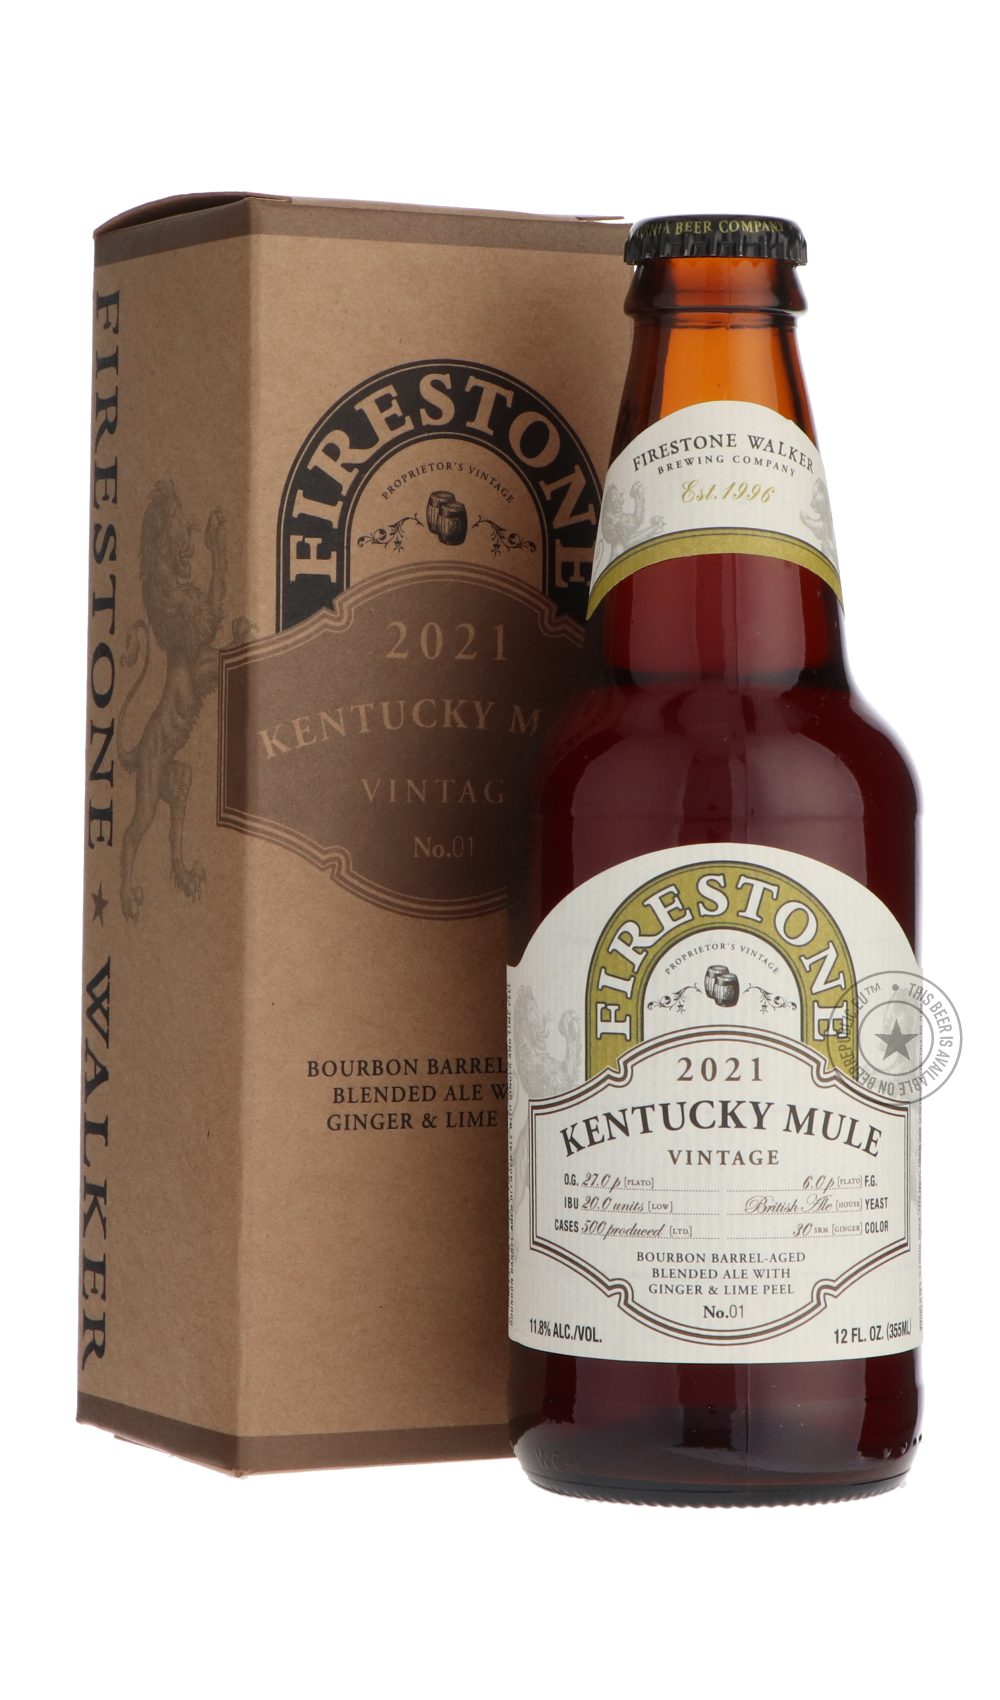 -Firestone Walker- Kentucky Mule-Brown & Dark- Only @ Beer Republic - The best online beer store for American & Canadian craft beer - Buy beer online from the USA and Canada - Bier online kopen - Amerikaans bier kopen - Craft beer store - Craft beer kopen - Amerikanisch bier kaufen - Bier online kaufen - Acheter biere online - IPA - Stout - Porter - New England IPA - Hazy IPA - Imperial Stout - Barrel Aged - Barrel Aged Imperial Stout - Brown - Dark beer - Blond - Blonde - Pilsner - Lager - Wheat - Weizen -